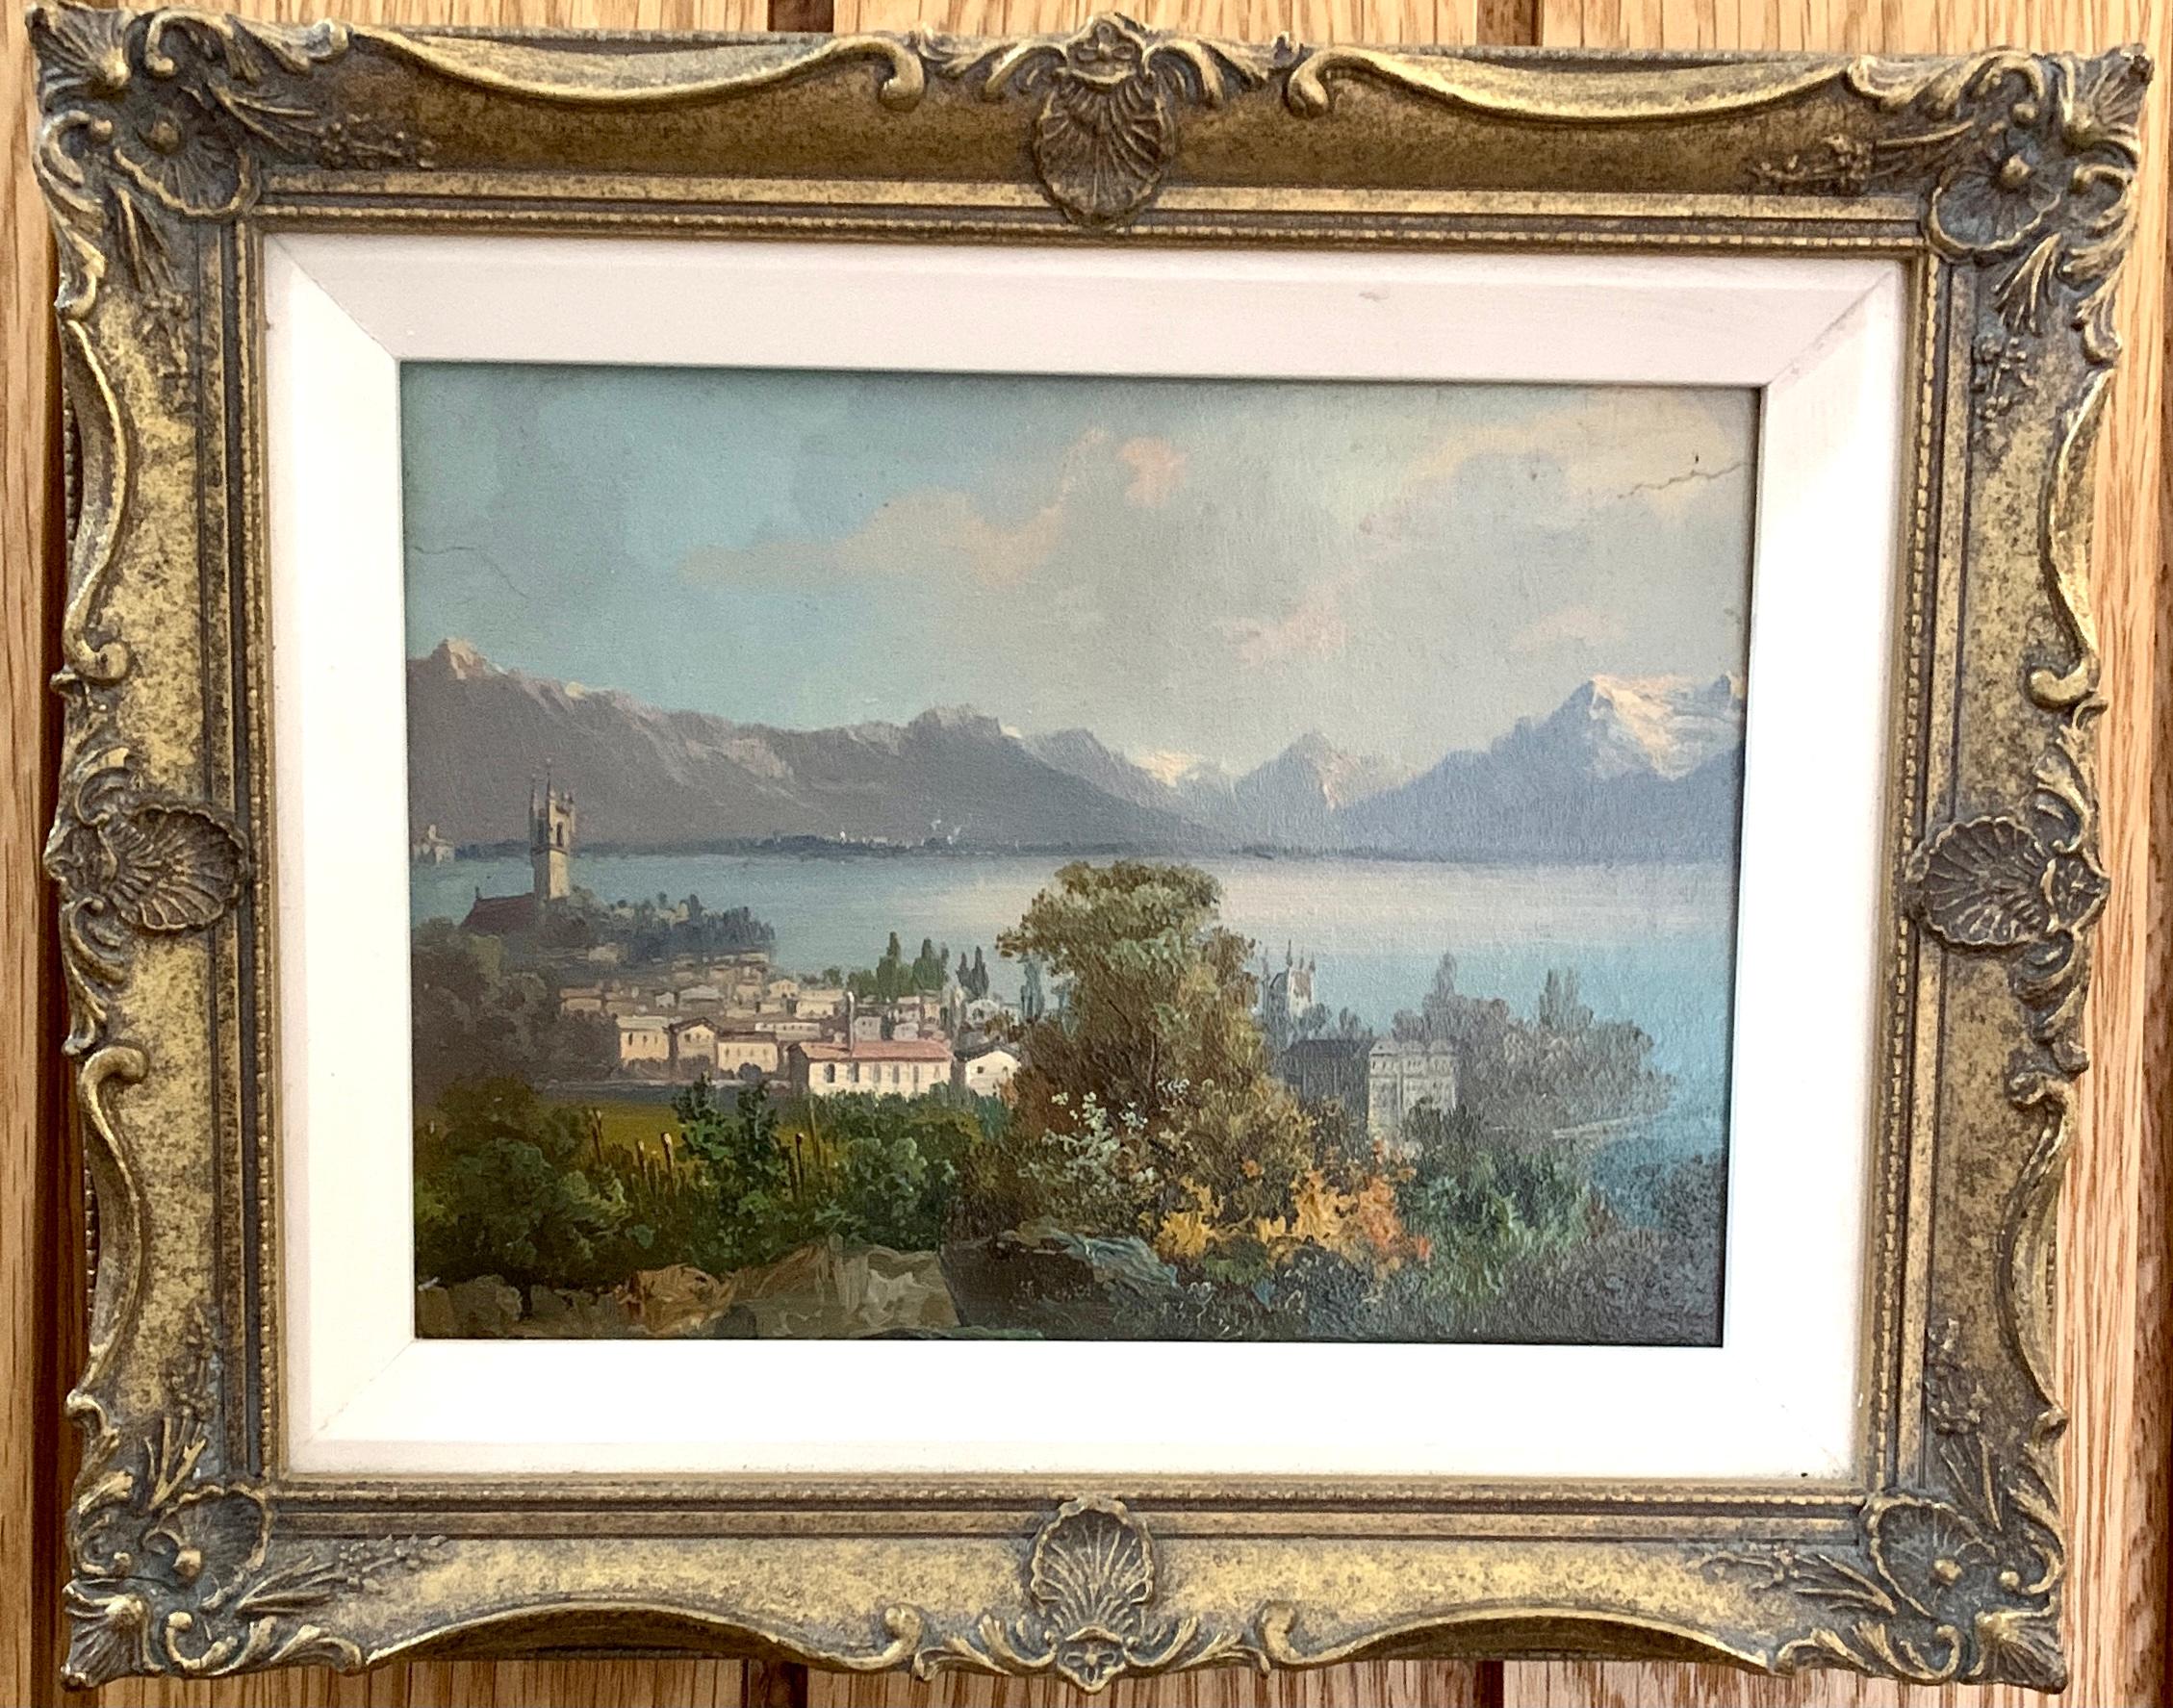 Early 20th century Swiss views of Vevey, on the north shore of Lake Geneva